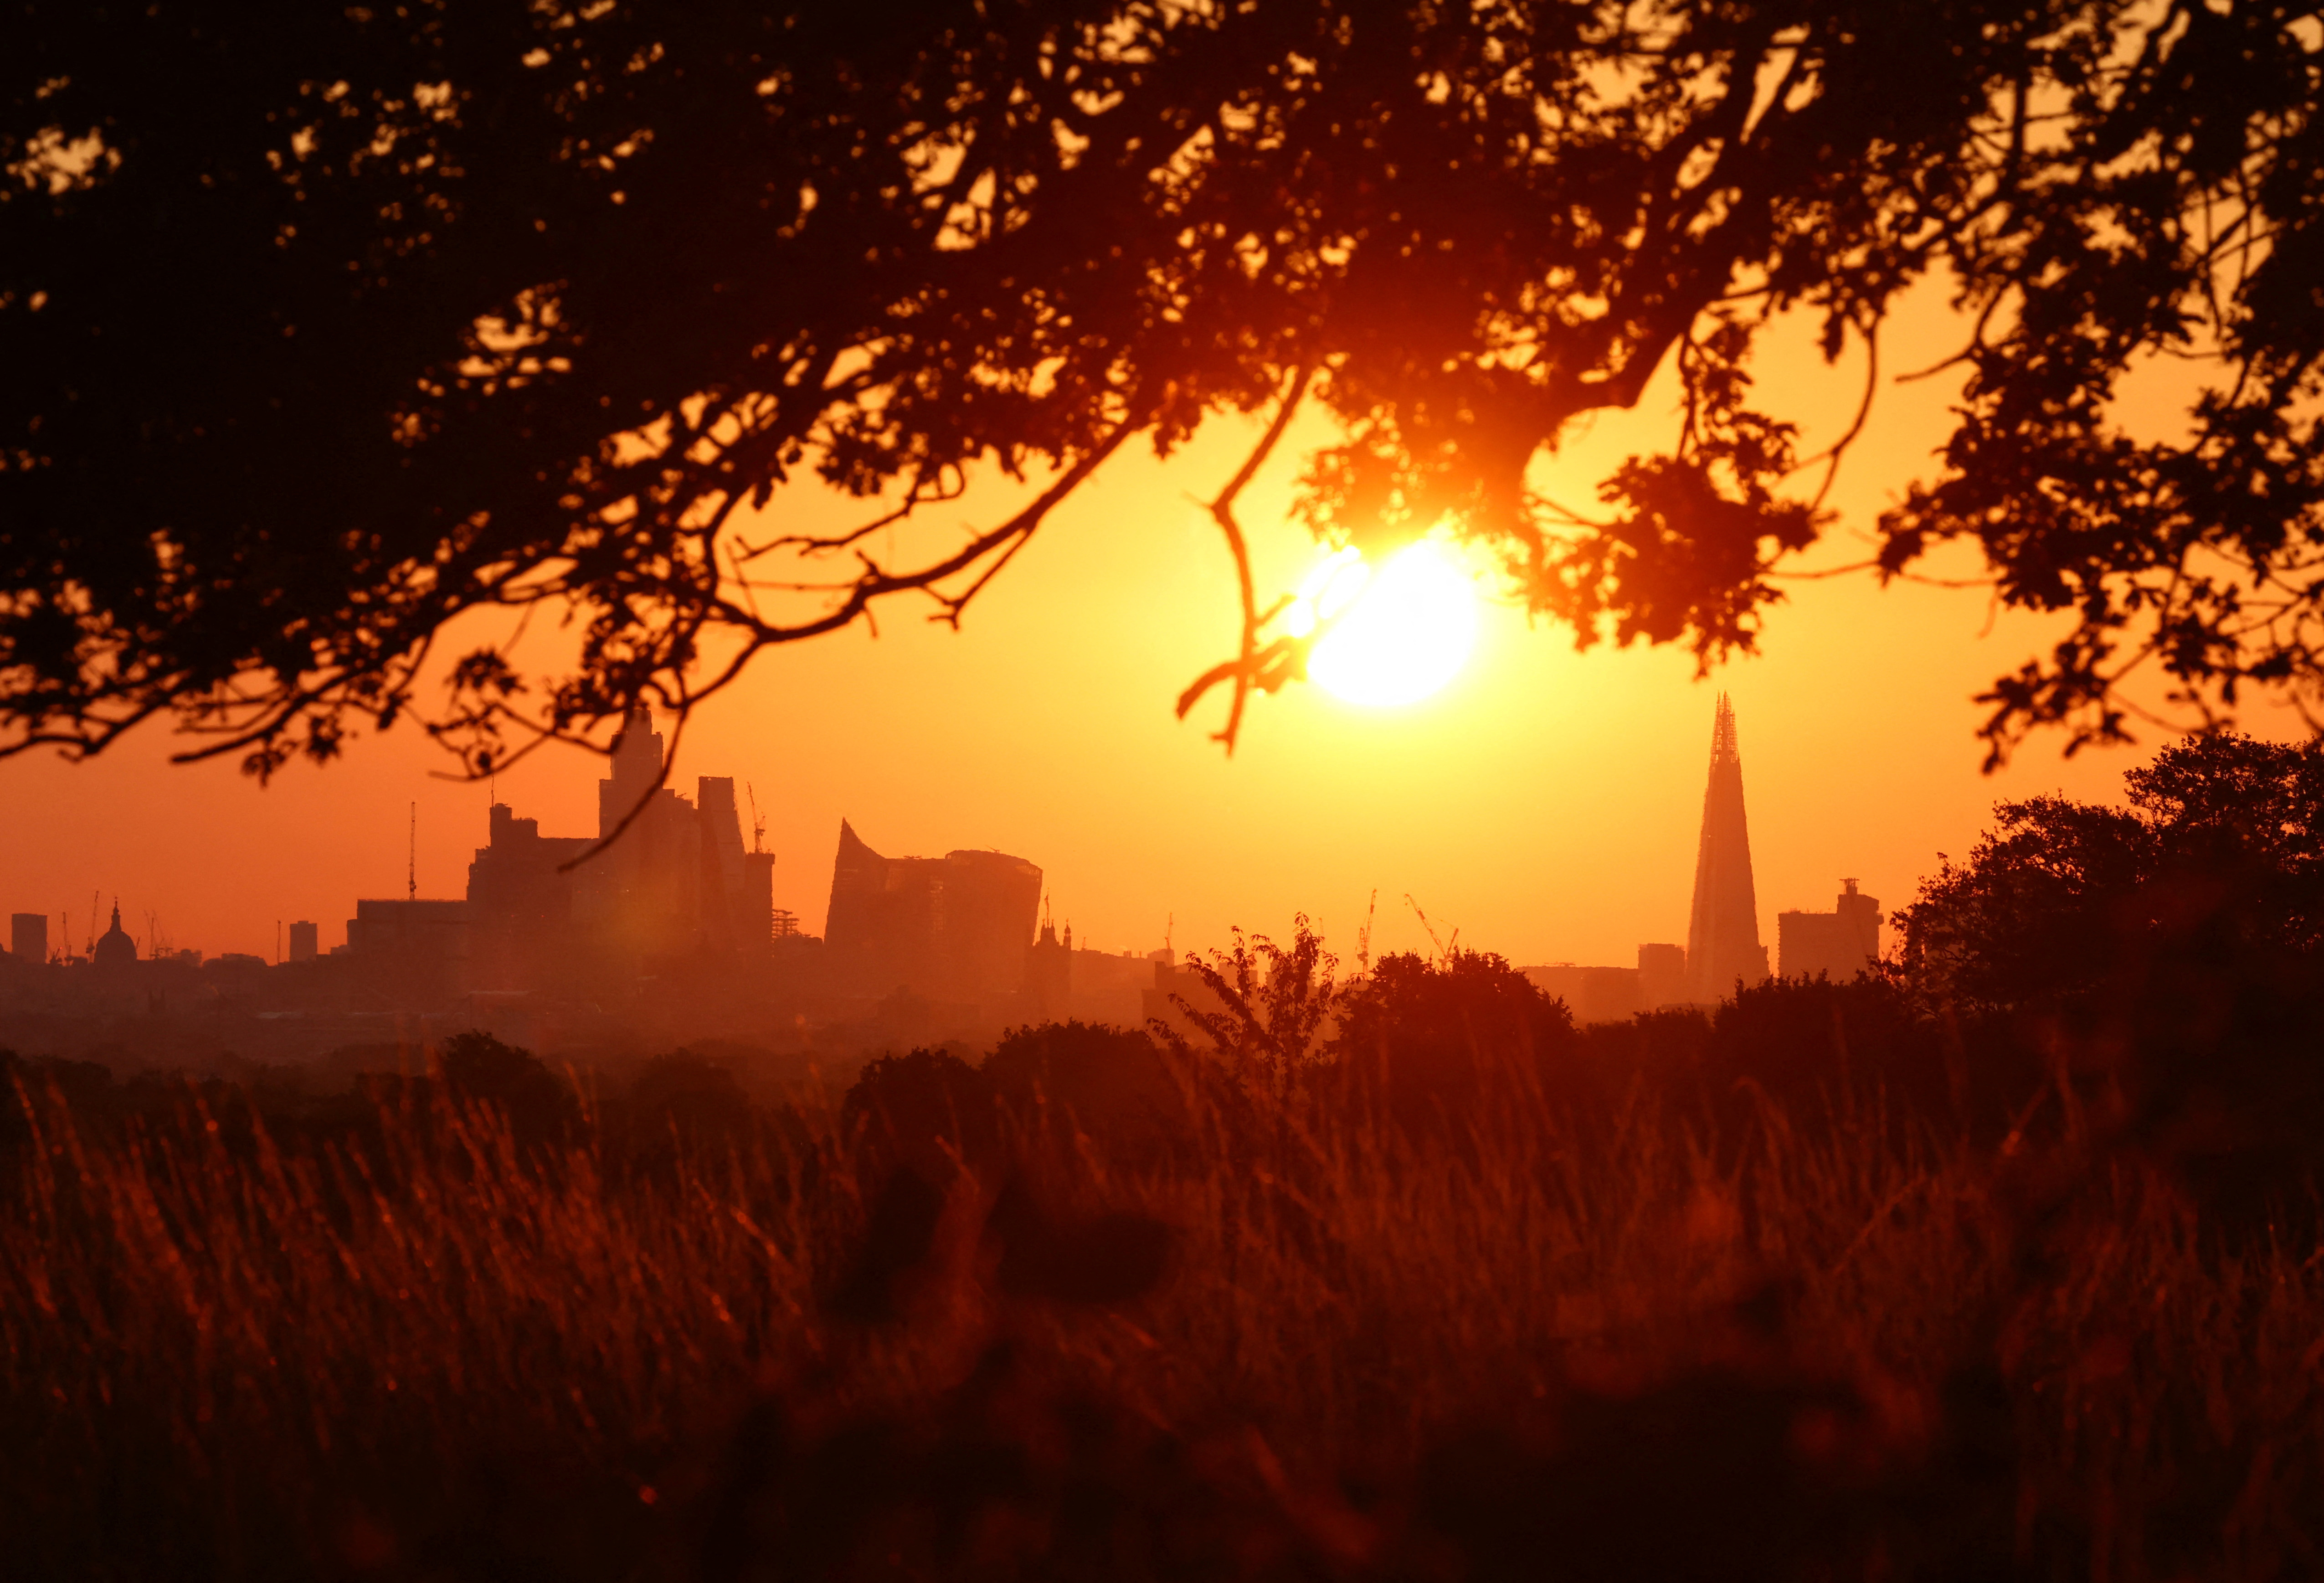 The London skyline is seen shortly after sunrise from Richmond Park in London